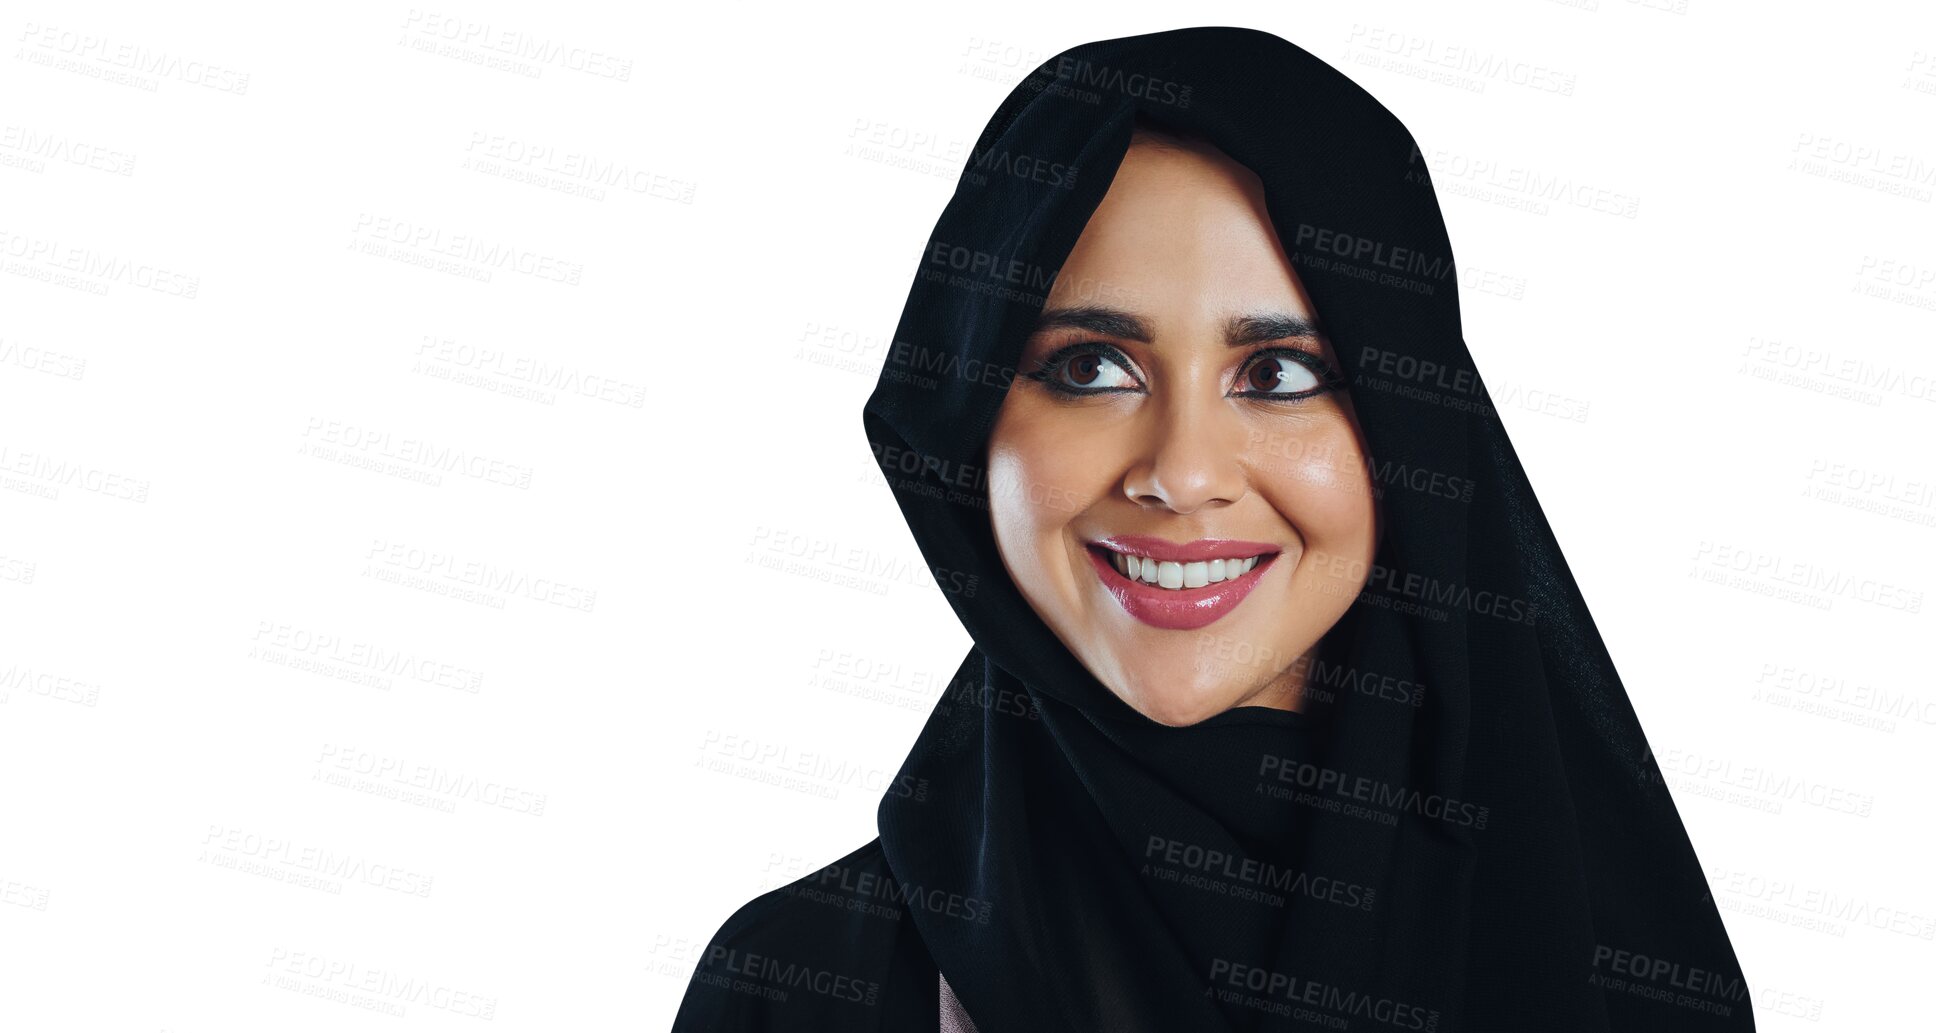 Buy stock photo Face, beauty and thinking with Islamic woman isolated on transparent background for faith or religion. Smile, idea and planning with happy young muslim person in hijab for culture or tradition on PNG